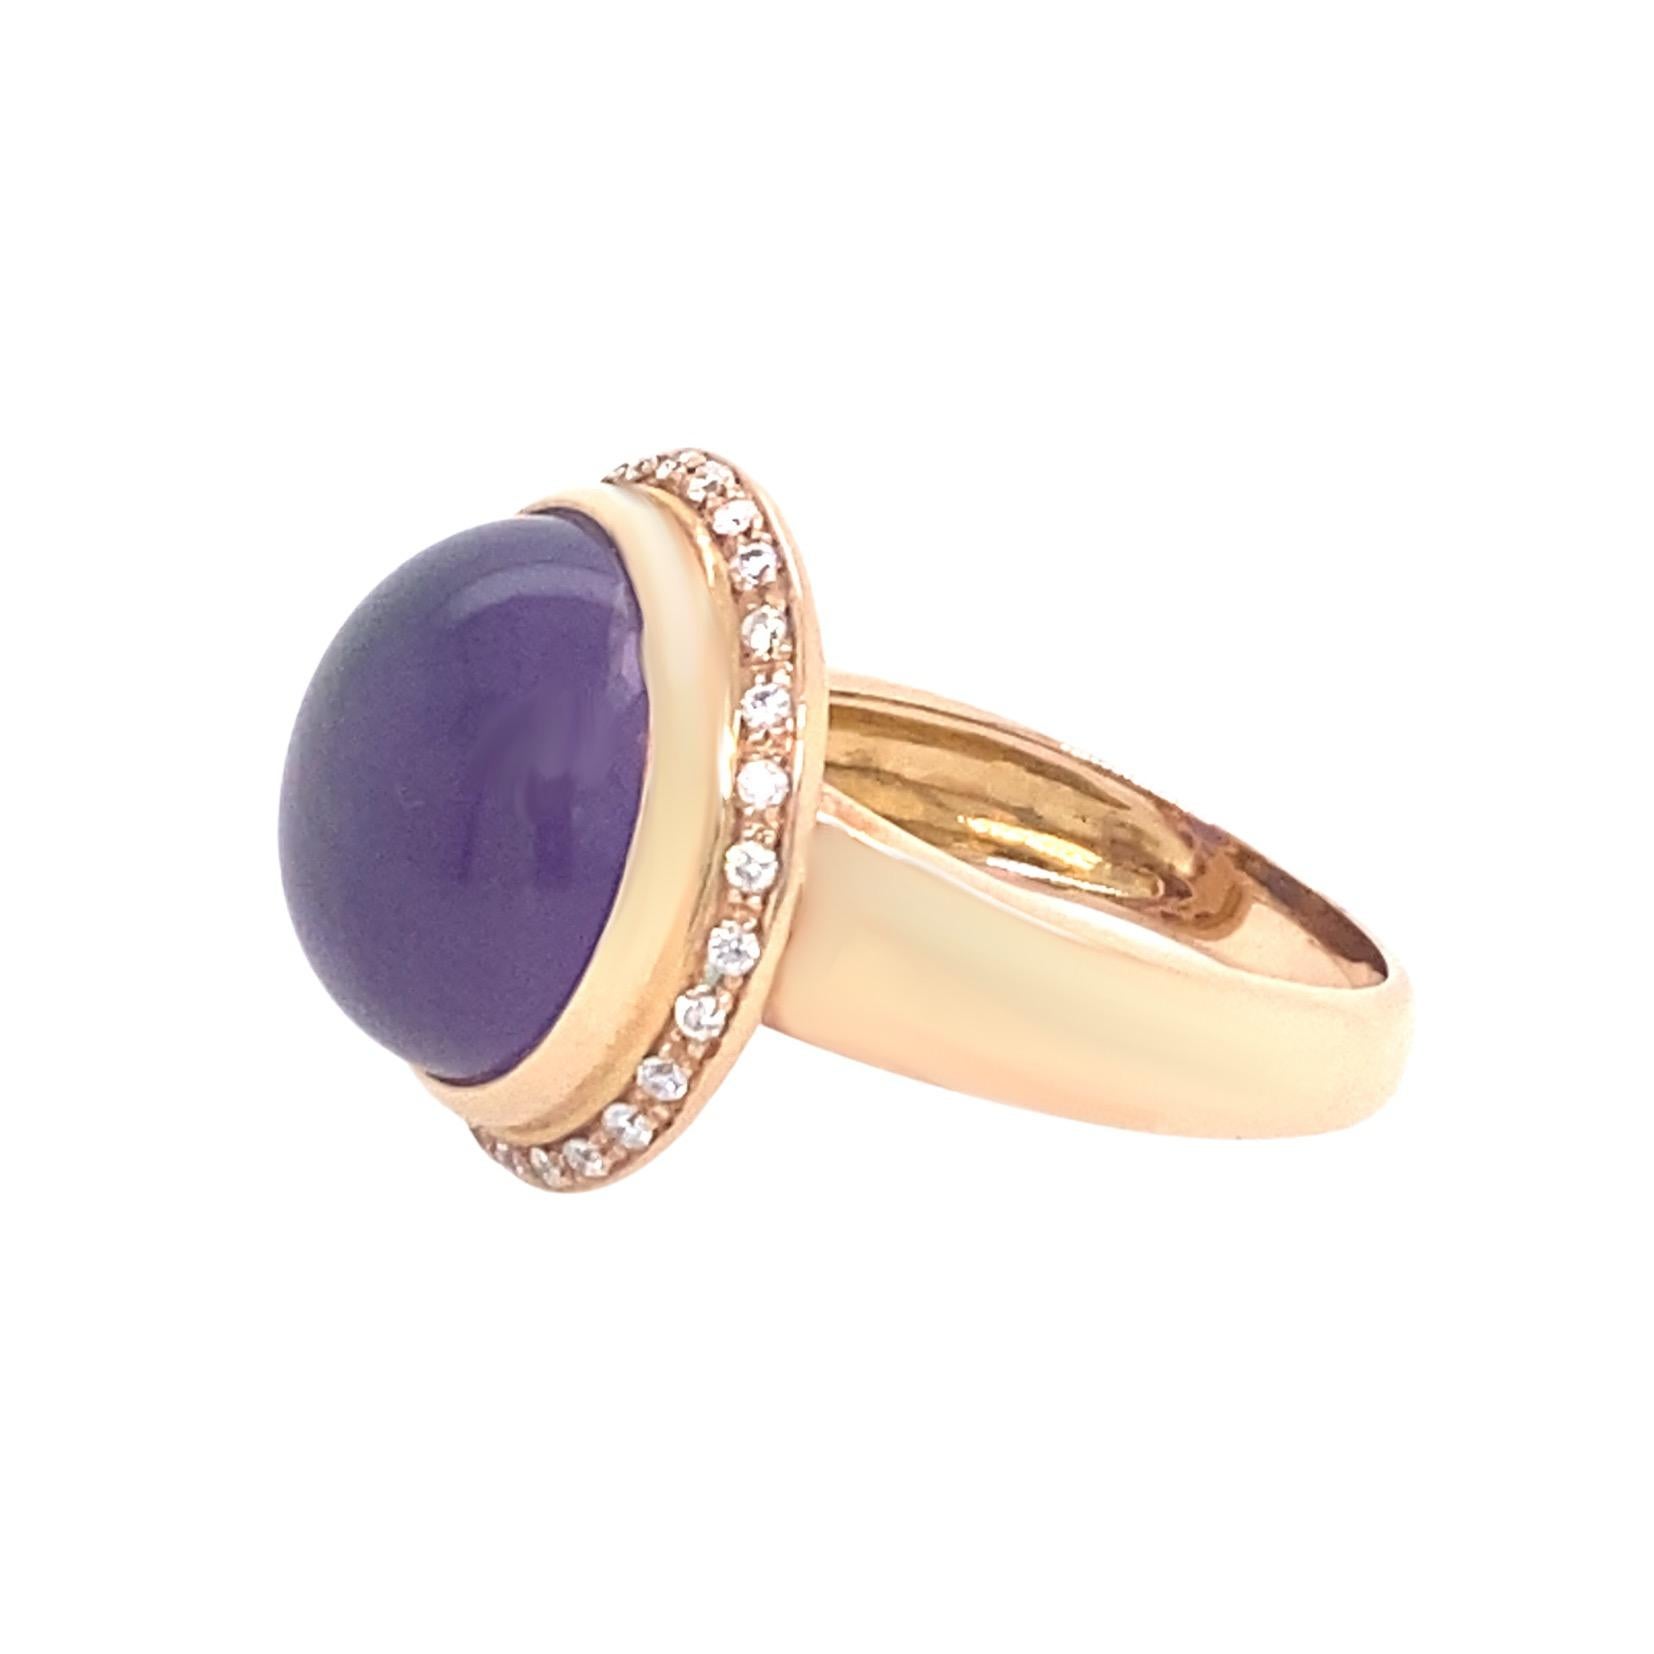 Contemporary 21st Century 18 Karat Gold Smooth Amethyst and F/G VVS Diamond Cocktail Ring For Sale